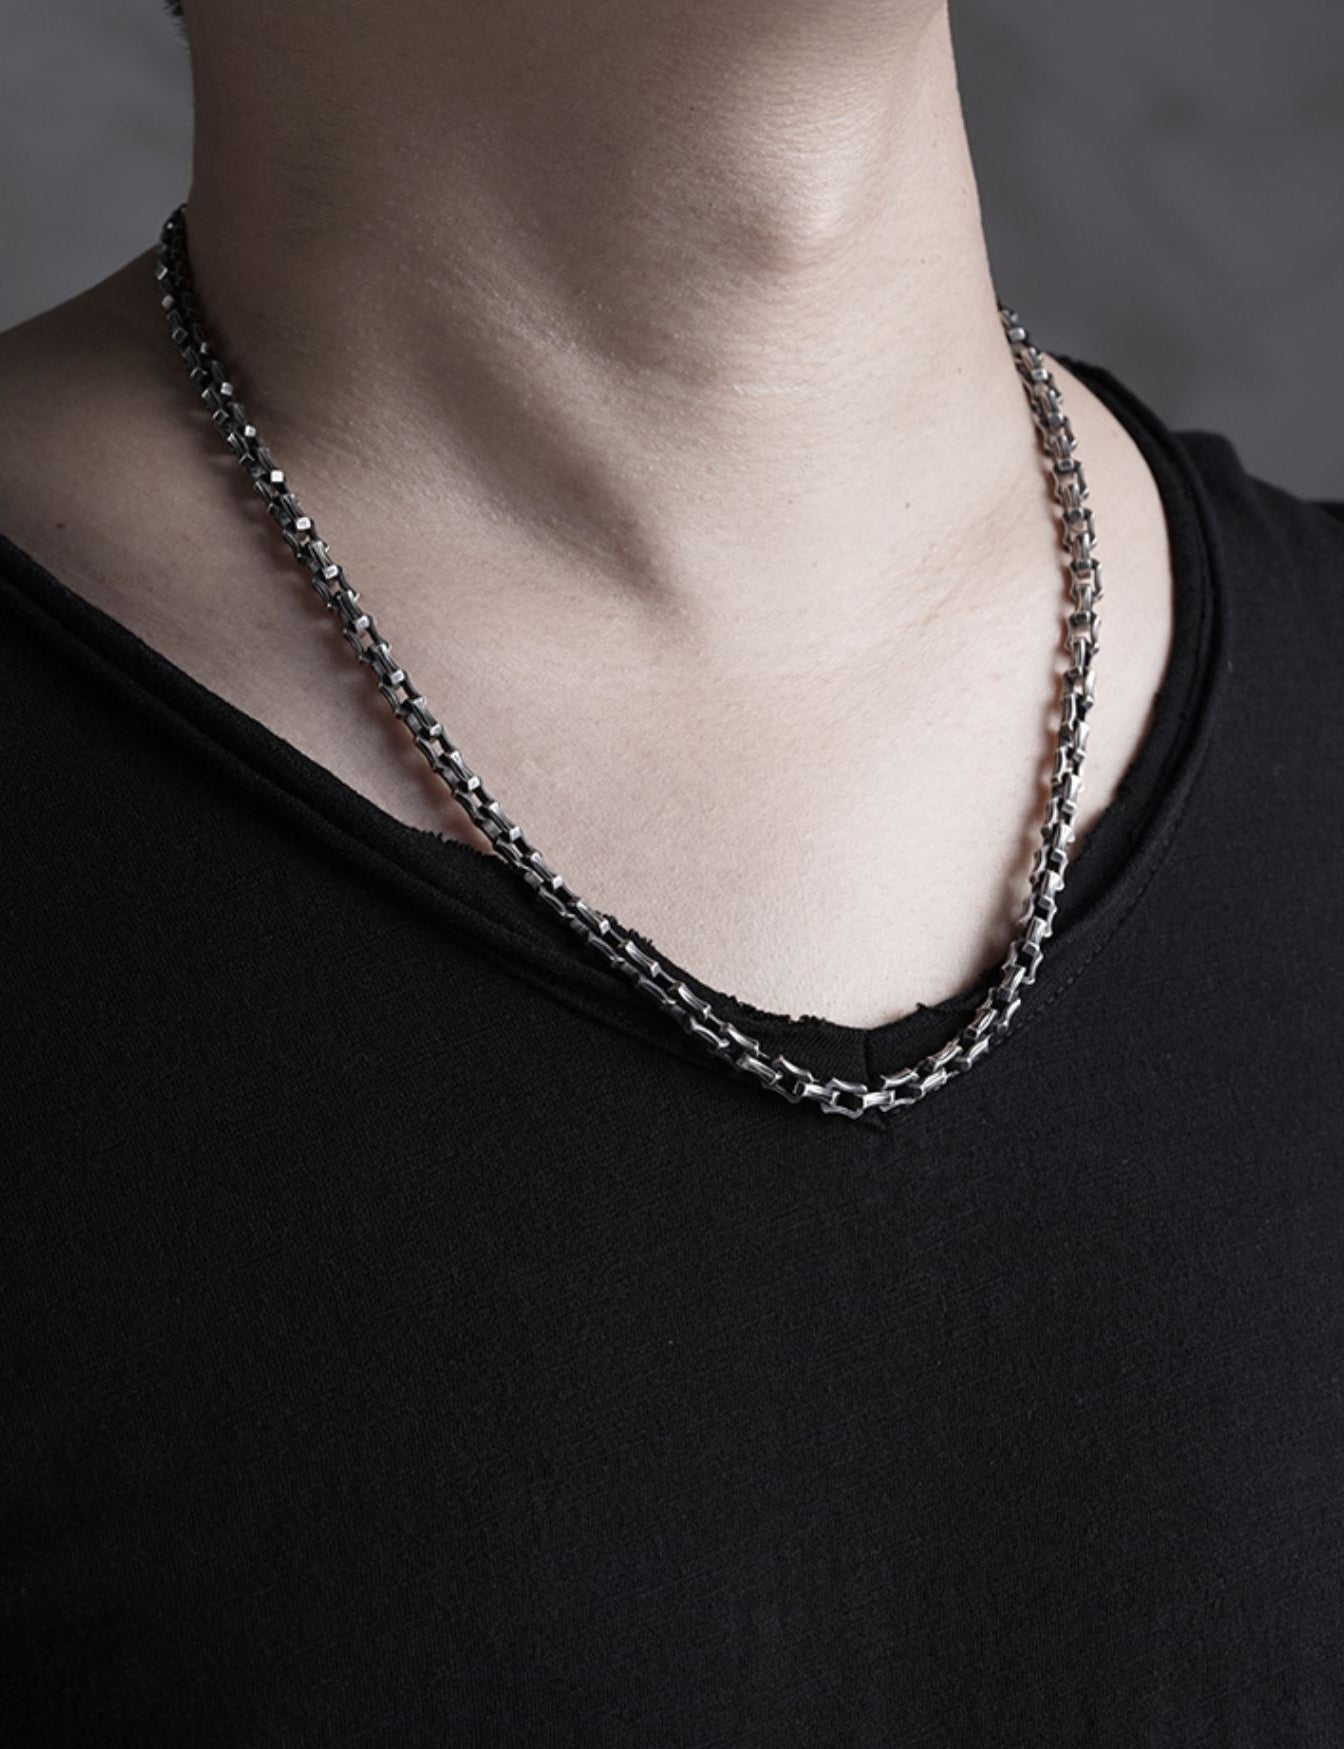 6mm Classy Silver Necklace Chain (Item No. N0092) Tartaria Onlinestore